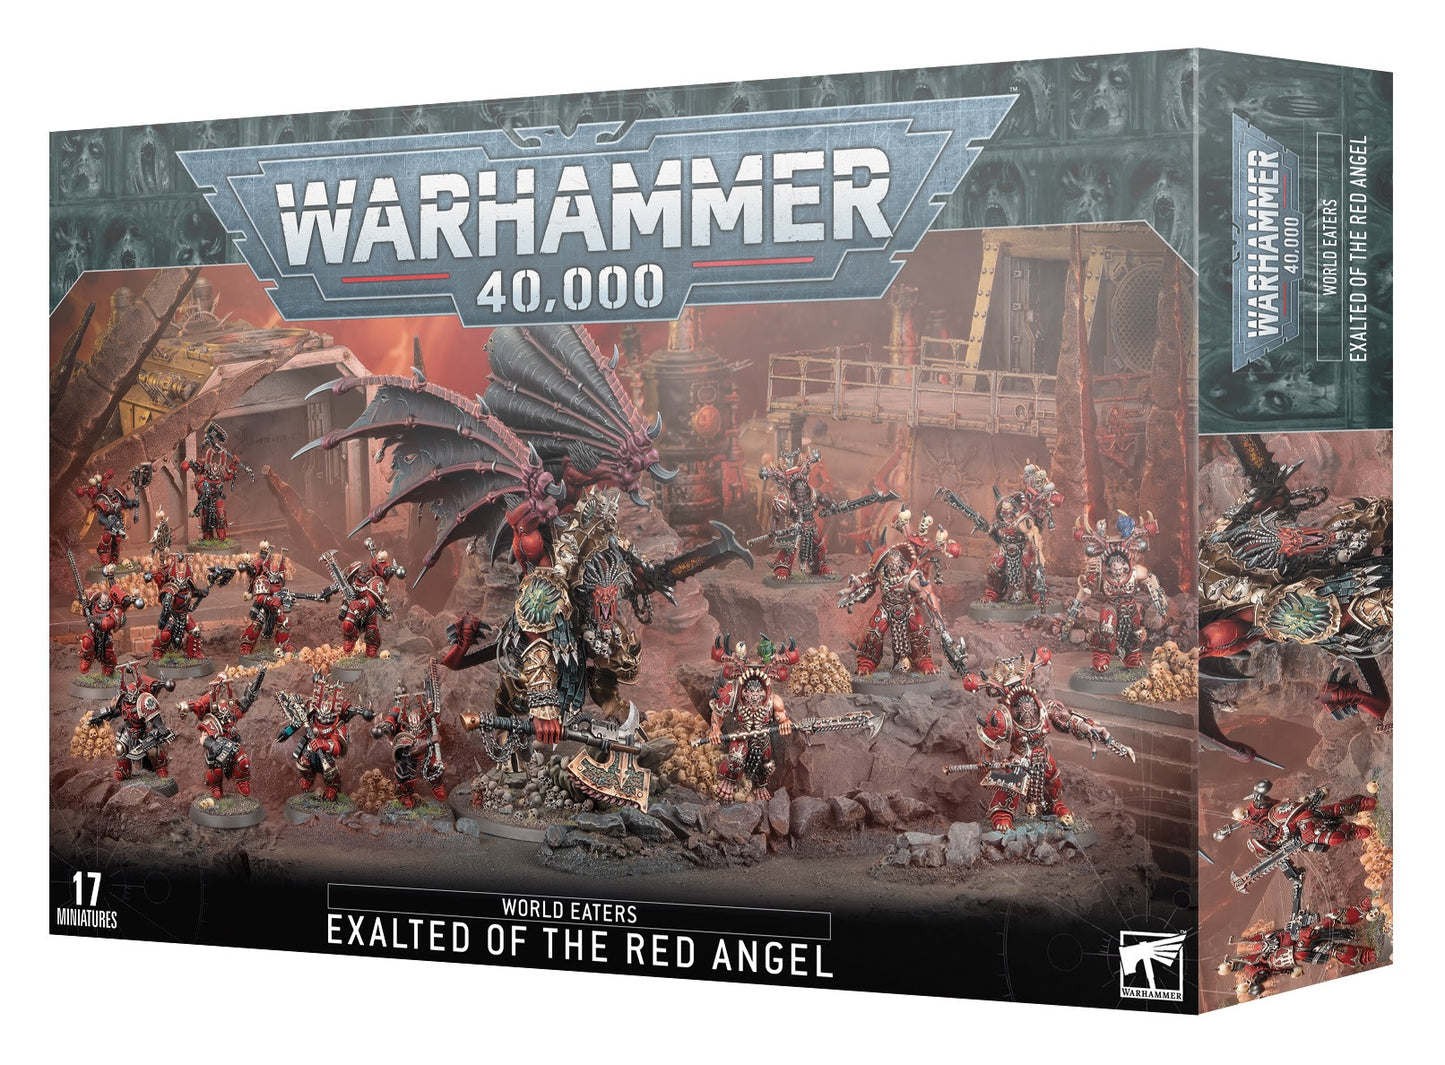 WARHAMMER 40000 BATTLEFORCE: WORLD EATERS EXALTED OF THE RED ANGEL